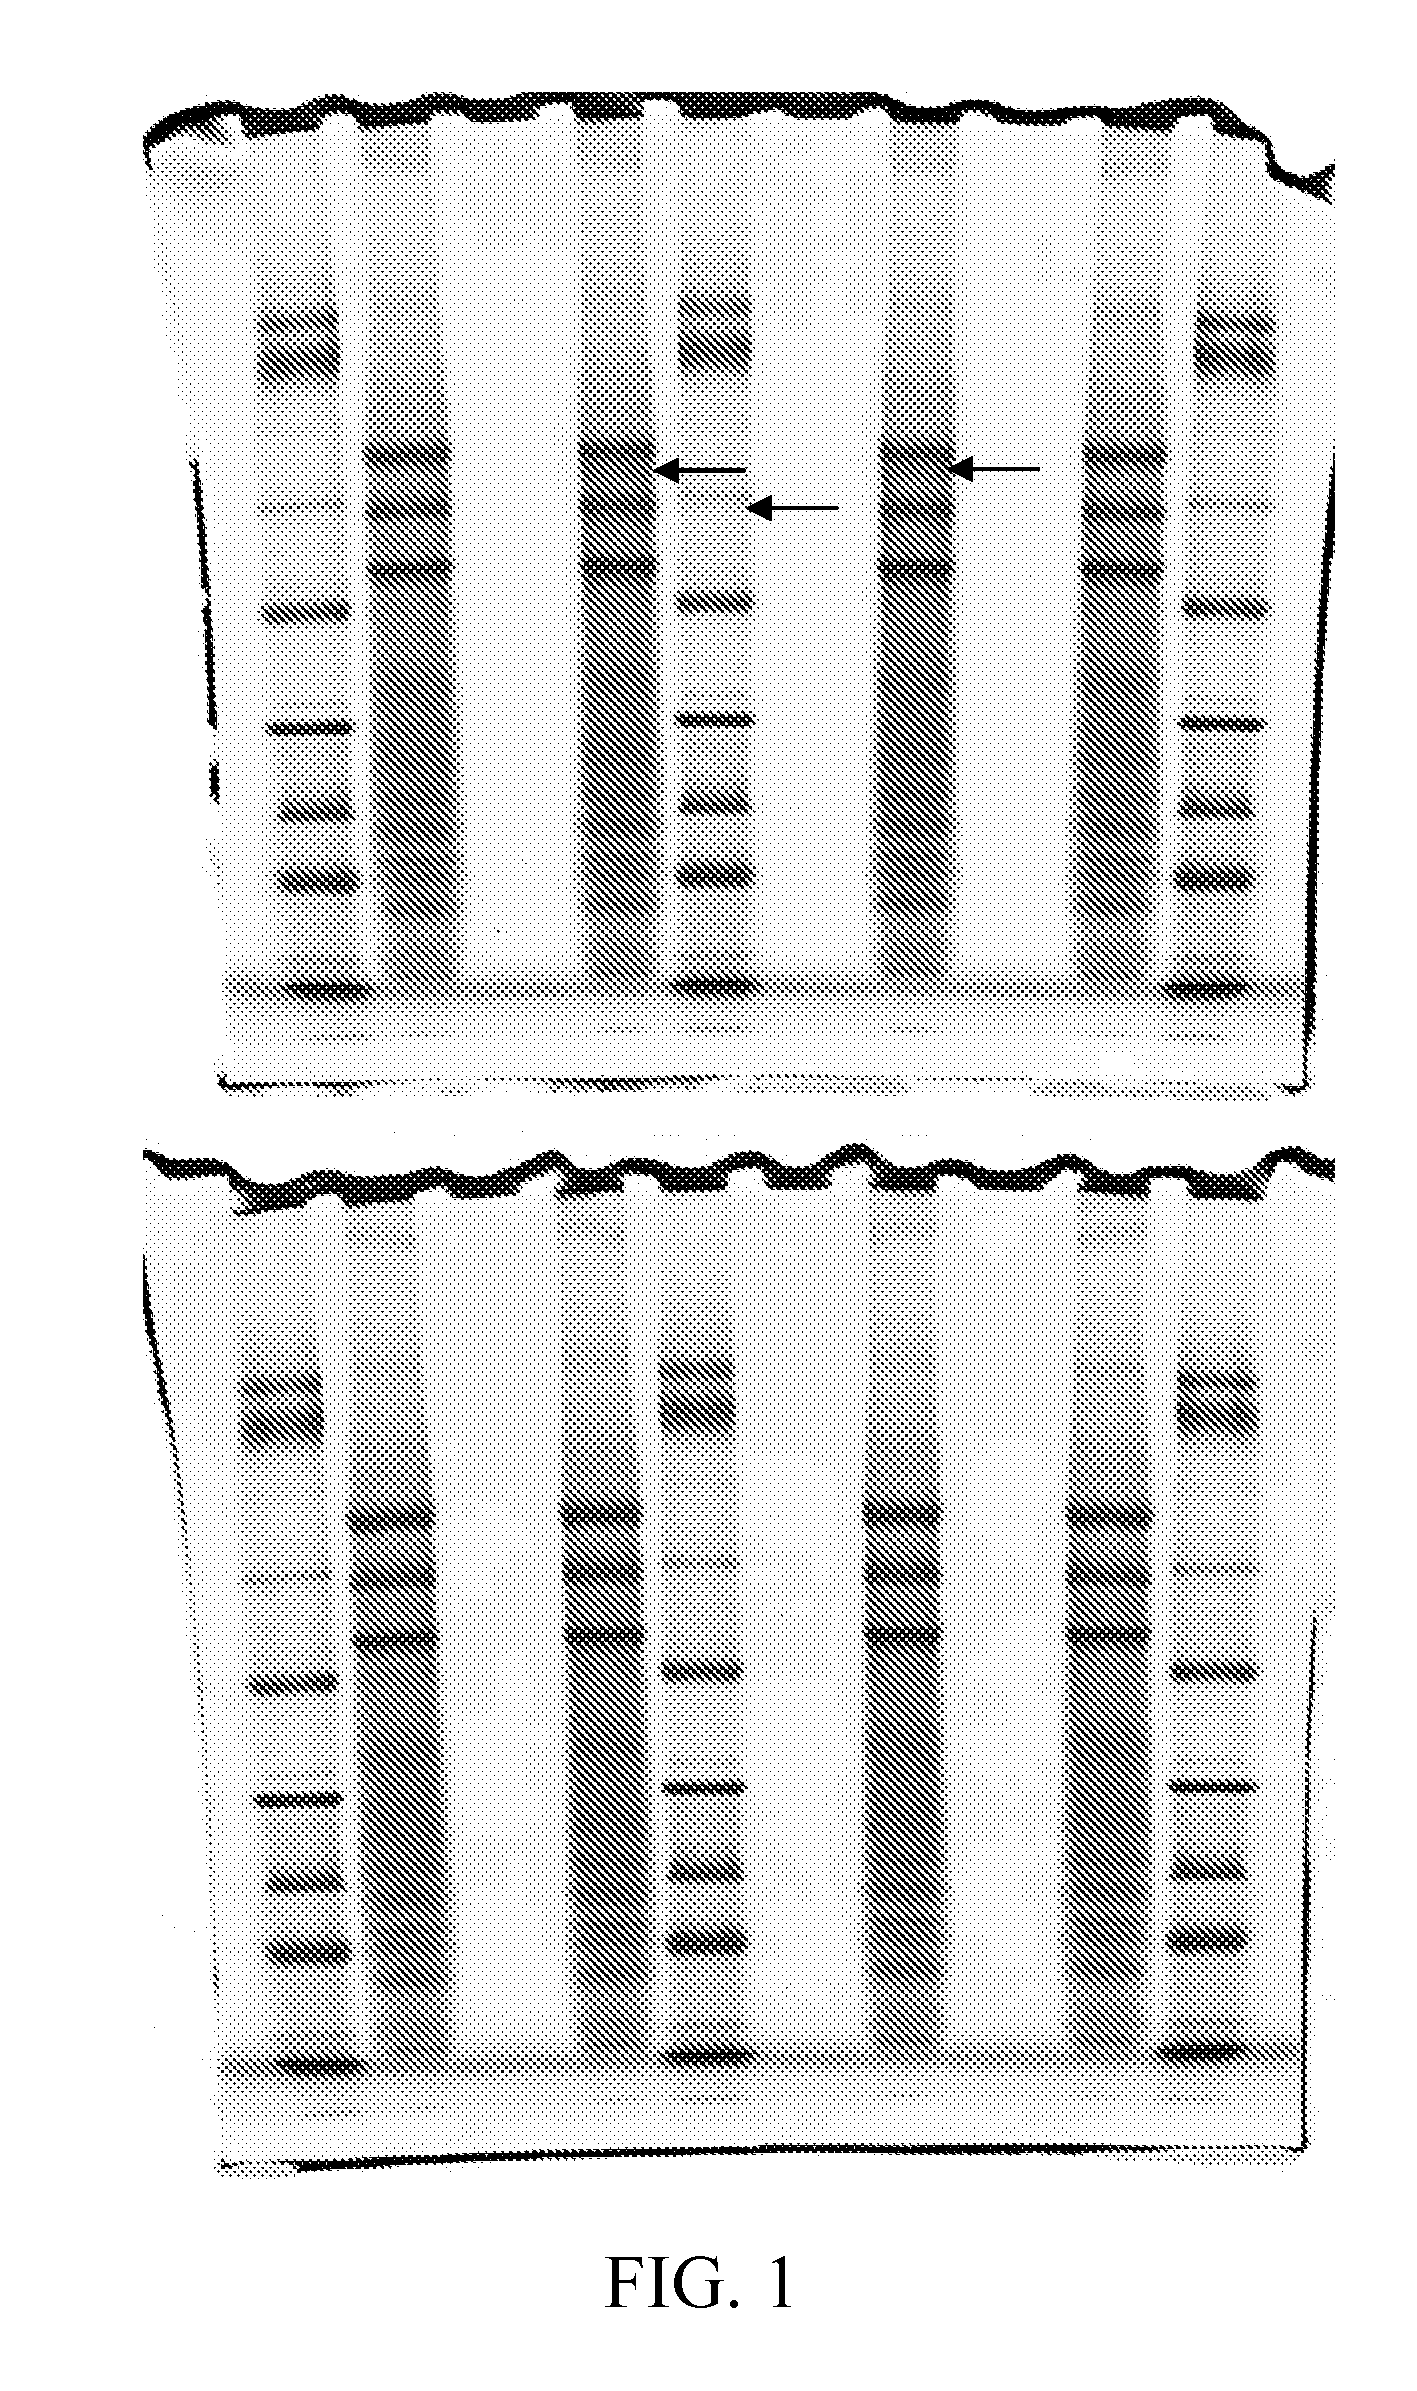 Compositions and Methods for Improving Resolution of Biomolecules Separated on Polyacrylamide Gels